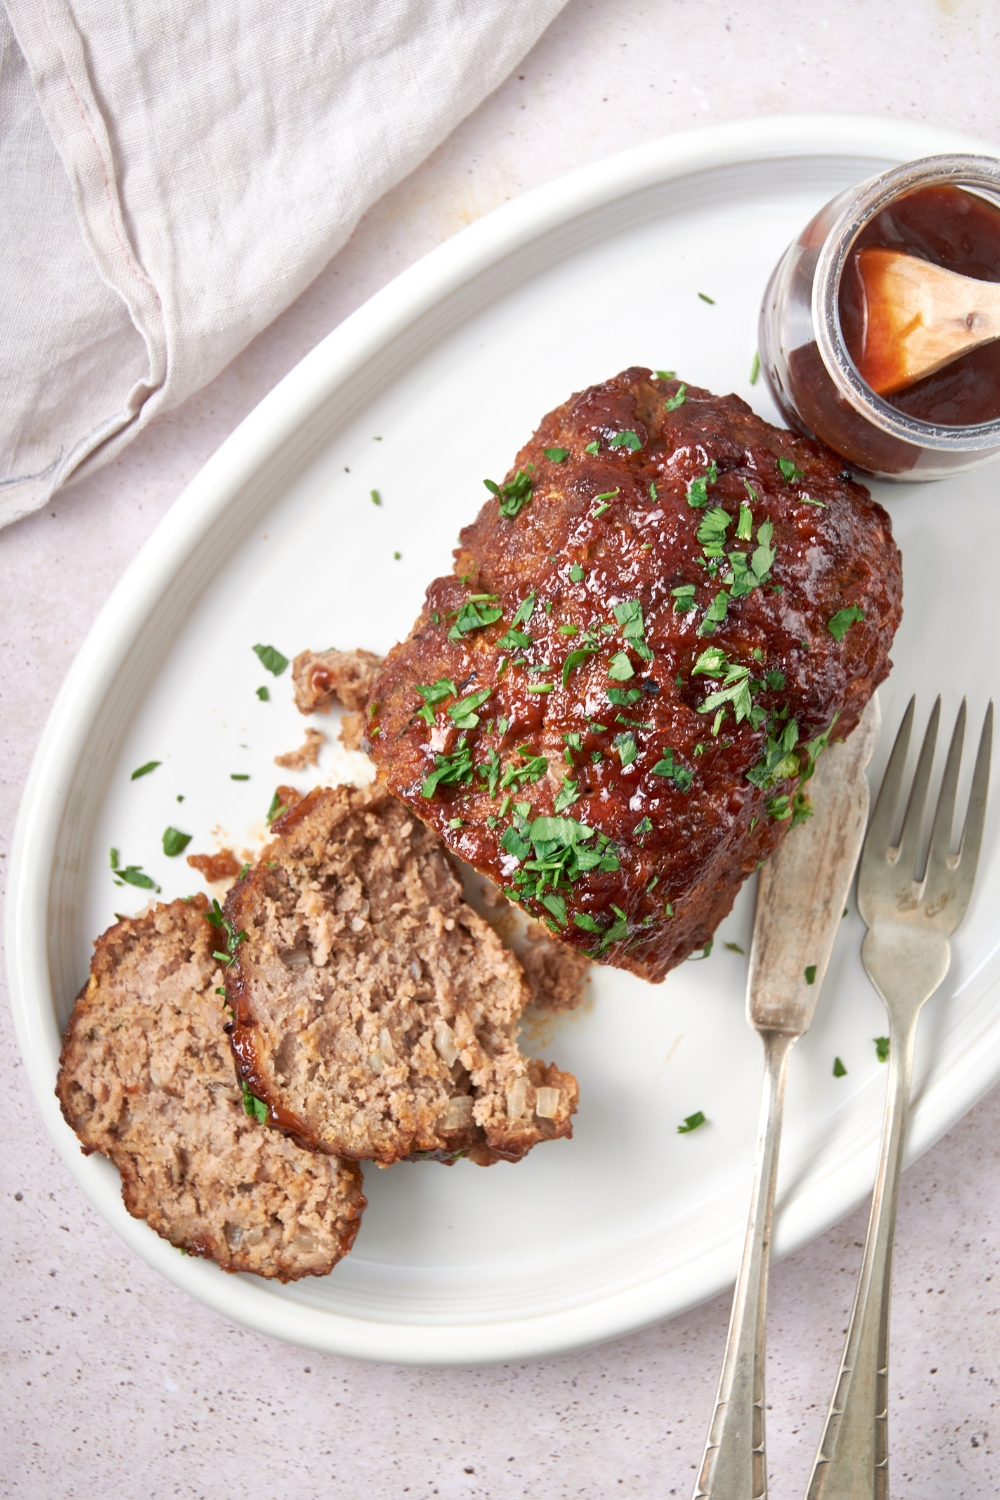 A cooked and sliced barbecue meatloaf garnished with parsley on a white serving tray. A serving knife and fork are nearby with a jar of barbecue sauce.